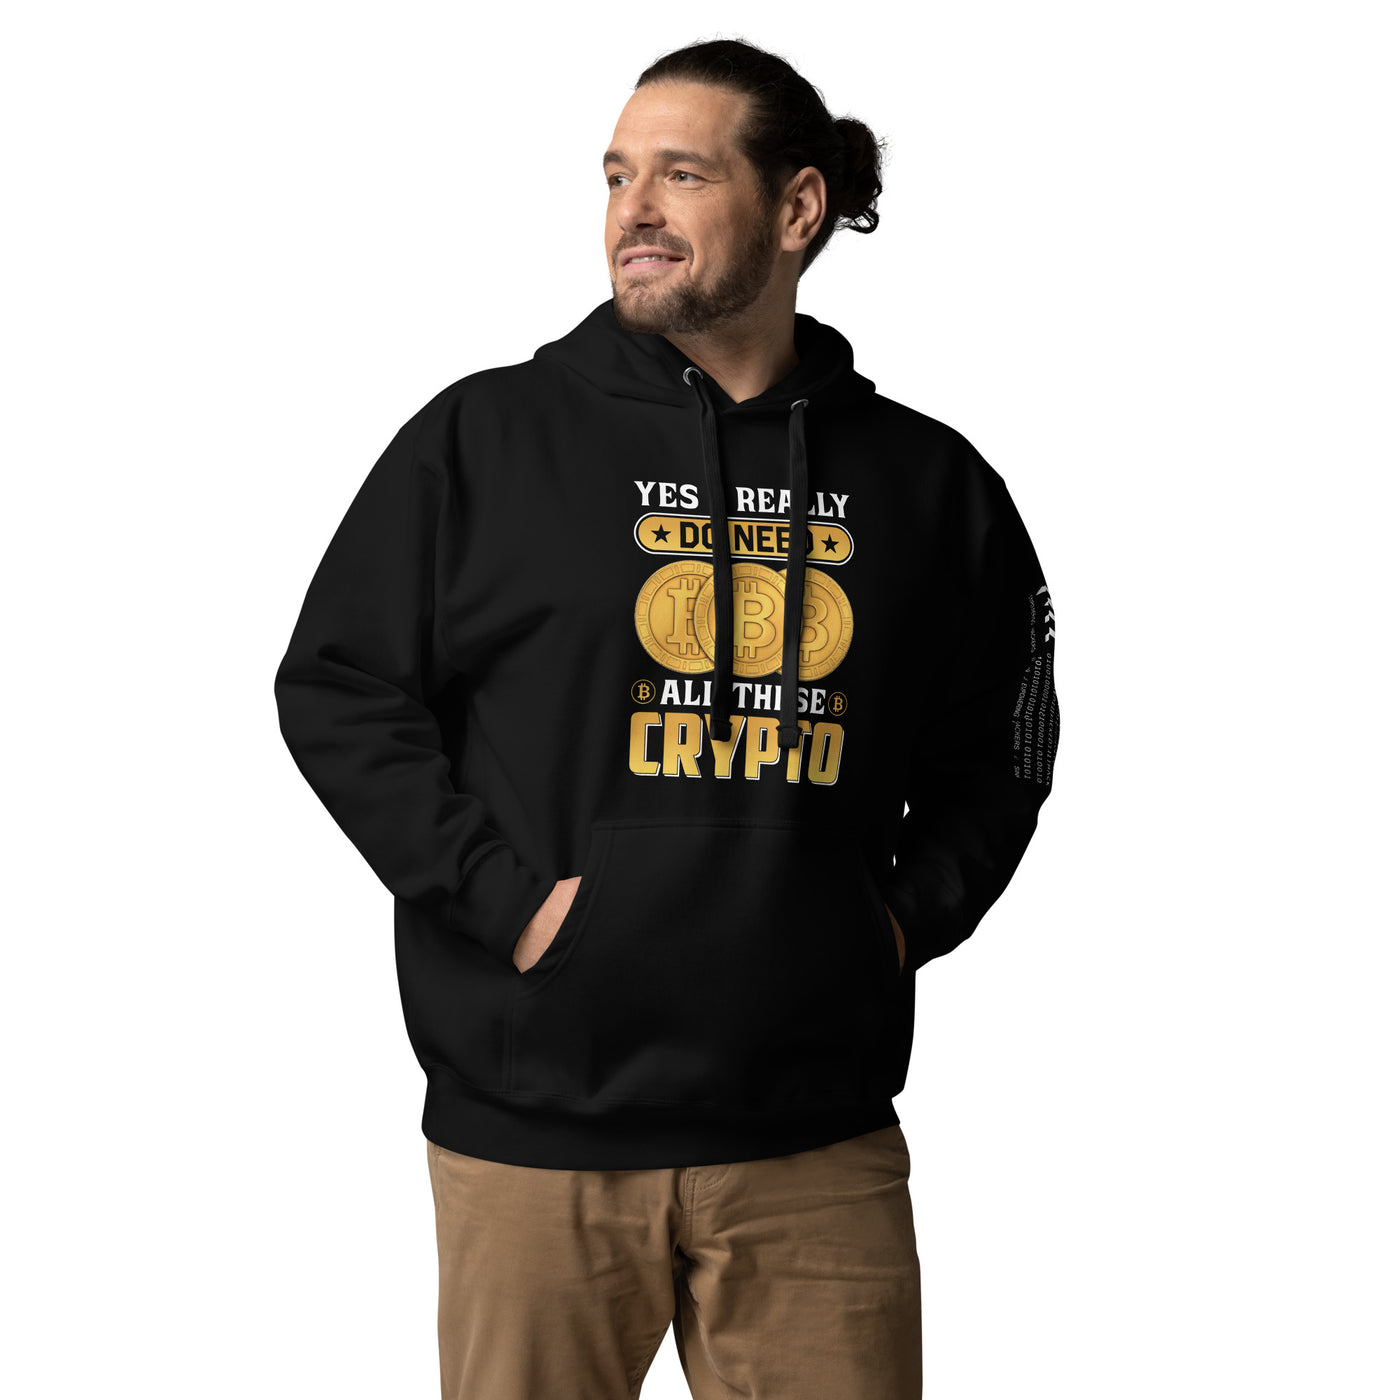 Yes, I really Do Need all these Bitcoin - Unisex Hoodie